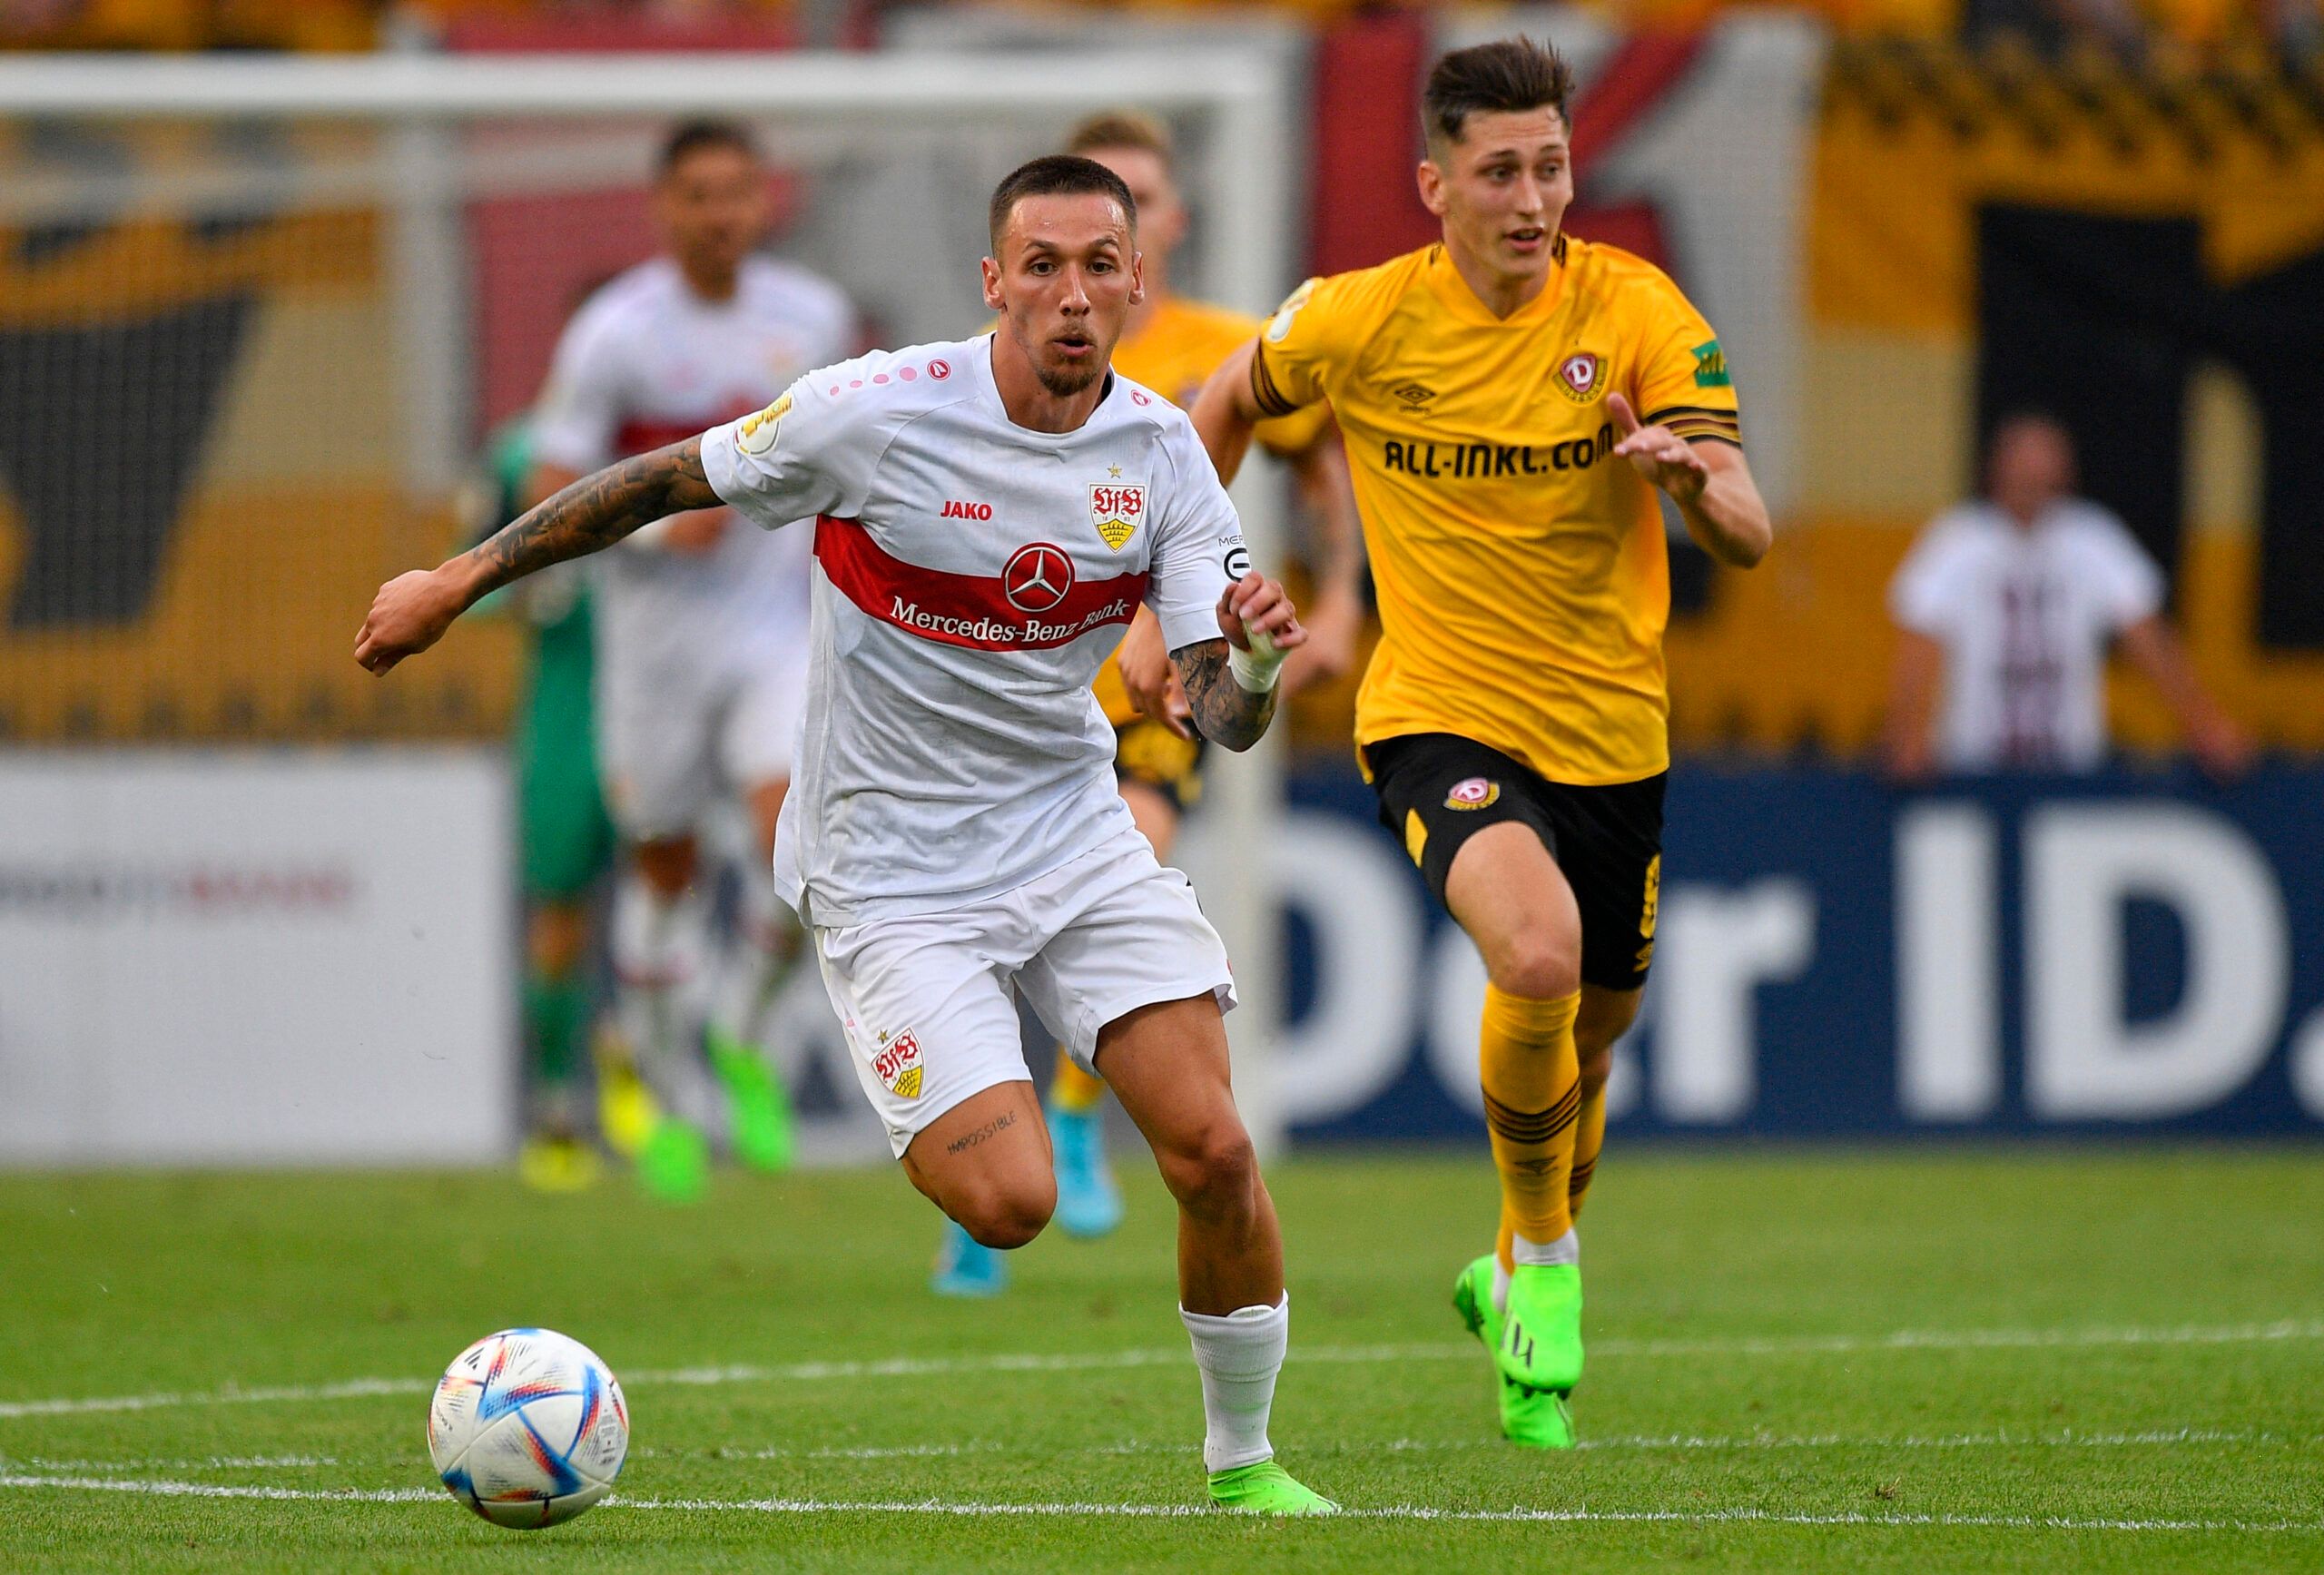 Soccer Football - DFB Cup - First Round - Dynamo Dresden v VfB Stuttgart - Rudolf Harbig Stadion, Dresden, Germany - July 29, 2022 VfB Stuttgart's Darko Churlinov in action REUTERS/Matthias Rietschel DFB REGULATIONS PROHIBIT ANY USE OF PHOTOGRAPHS AS IMAGE SEQUENCES AND/OR QUASI-VIDEO.